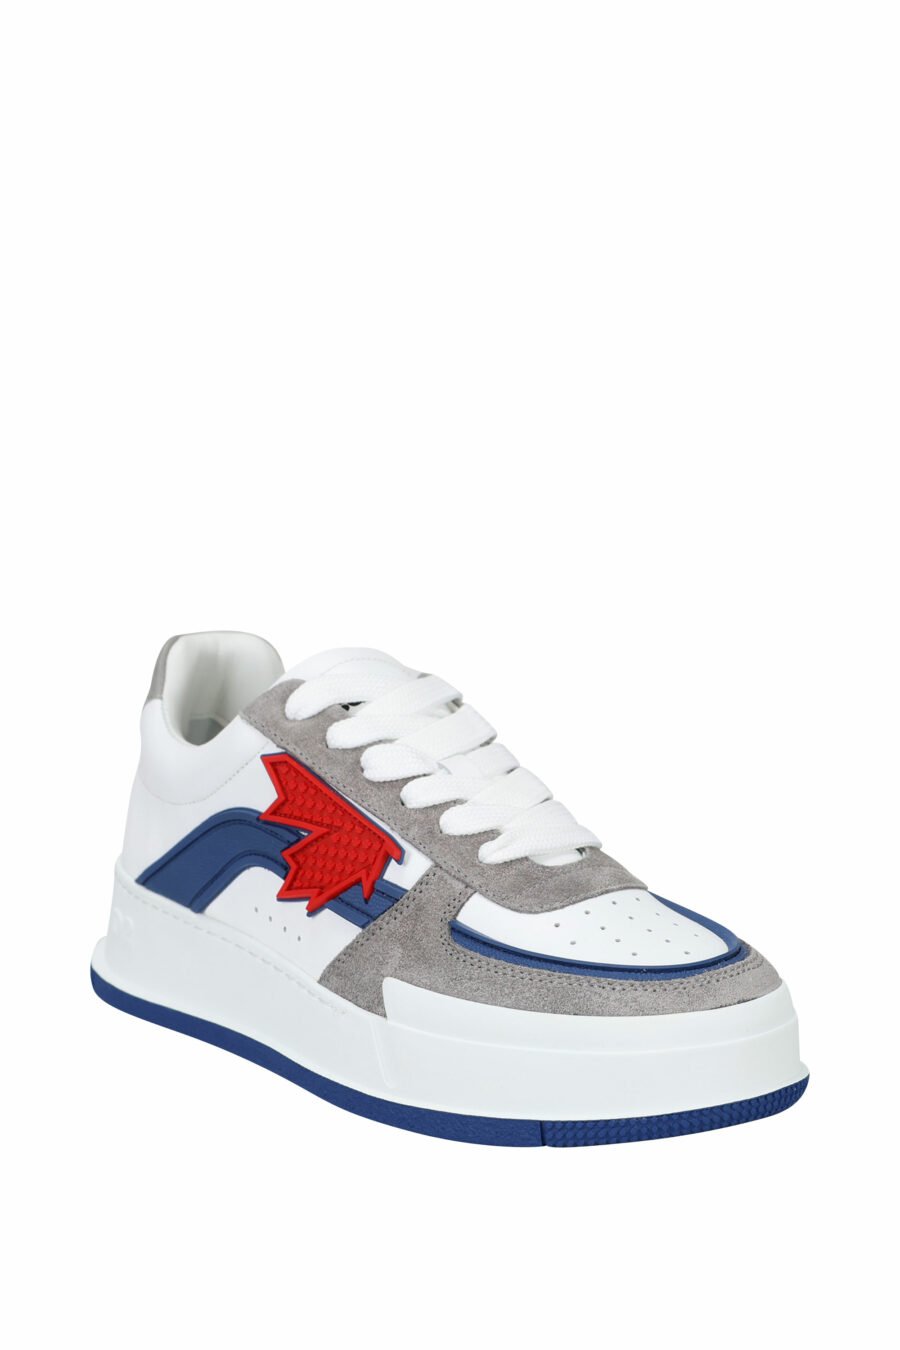 Trainers white mix with grey, blue and red leaf logo - 8055777242216 1